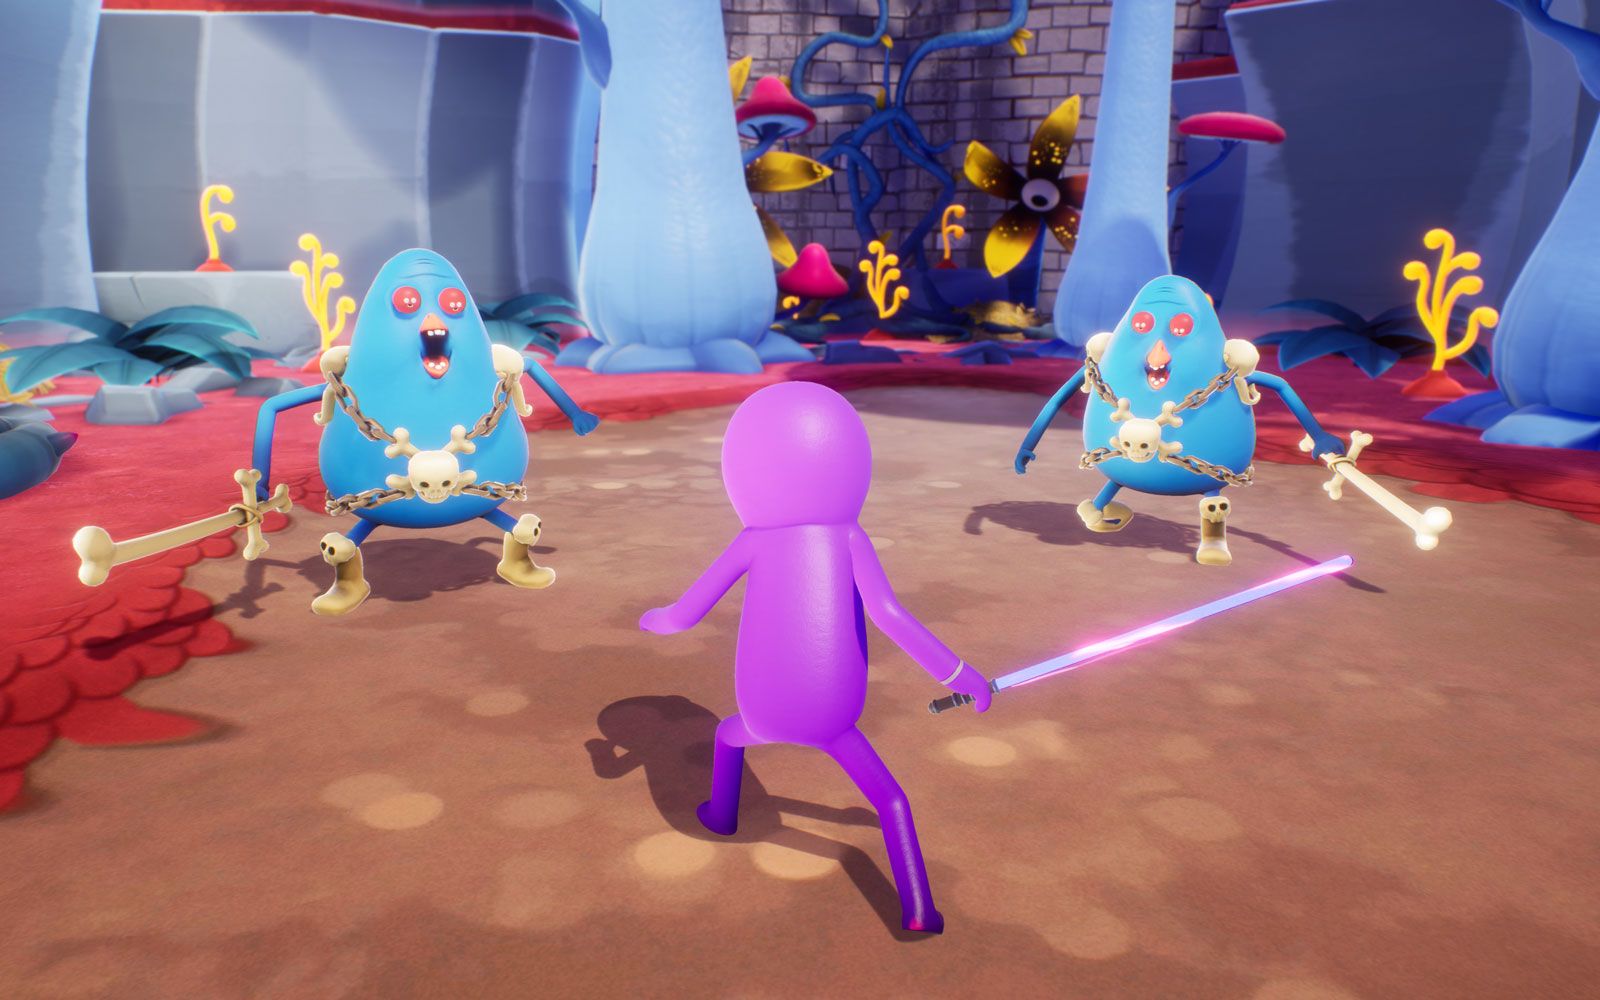 trover saves the universe switch vr